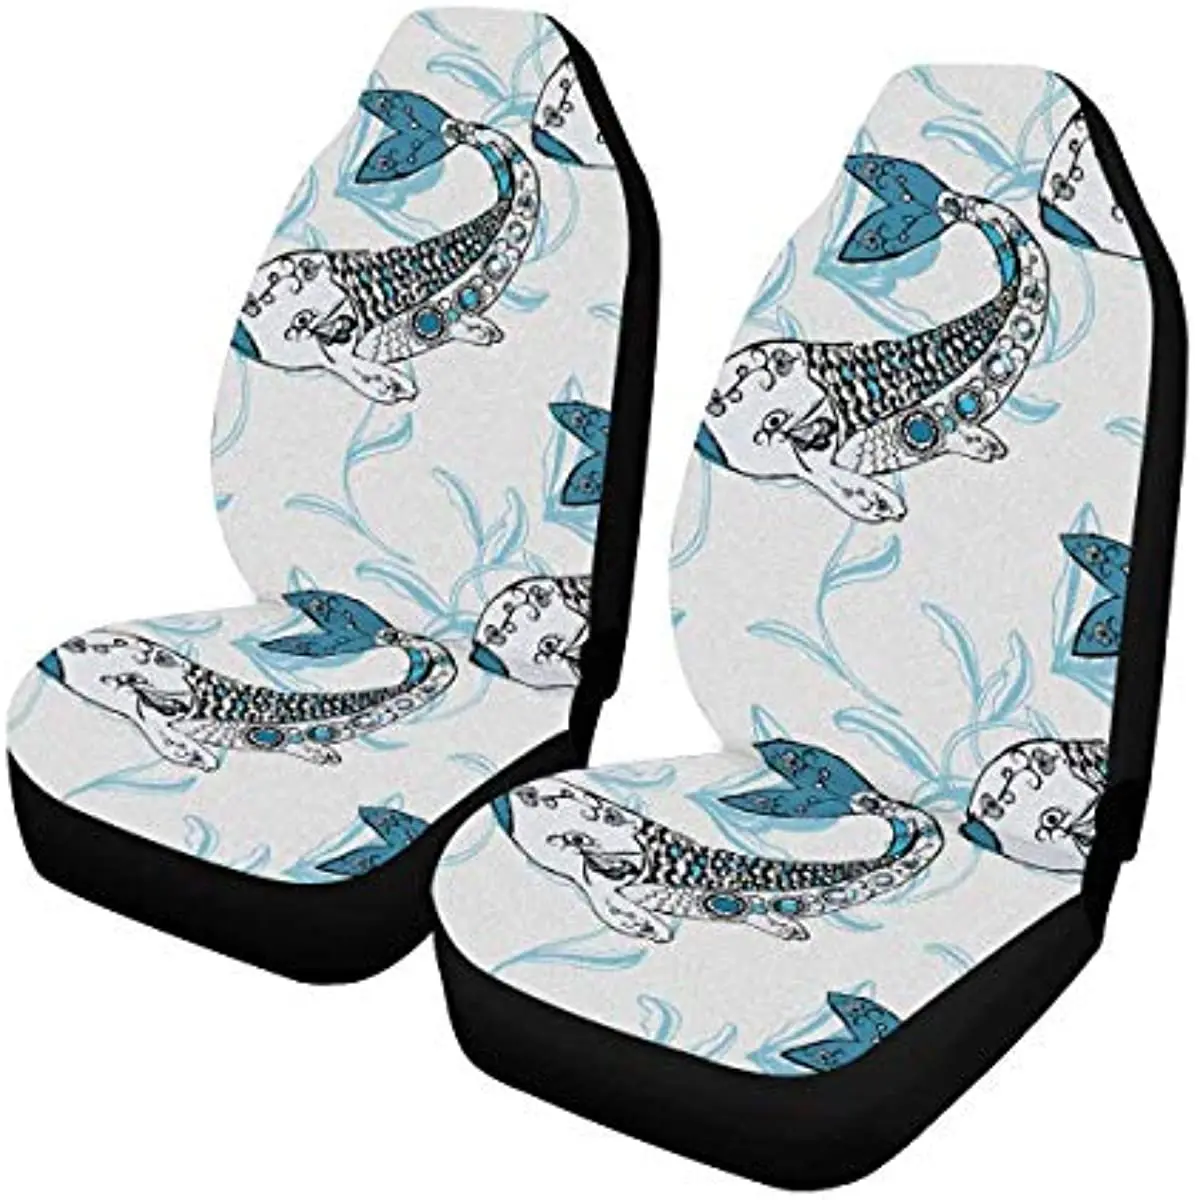 Custom Cute Cartoon Jellyfish Car Seat Covers for Front of 2,Vehicle Seat Protector Car Mat Fit Most Car,Truck,SUV